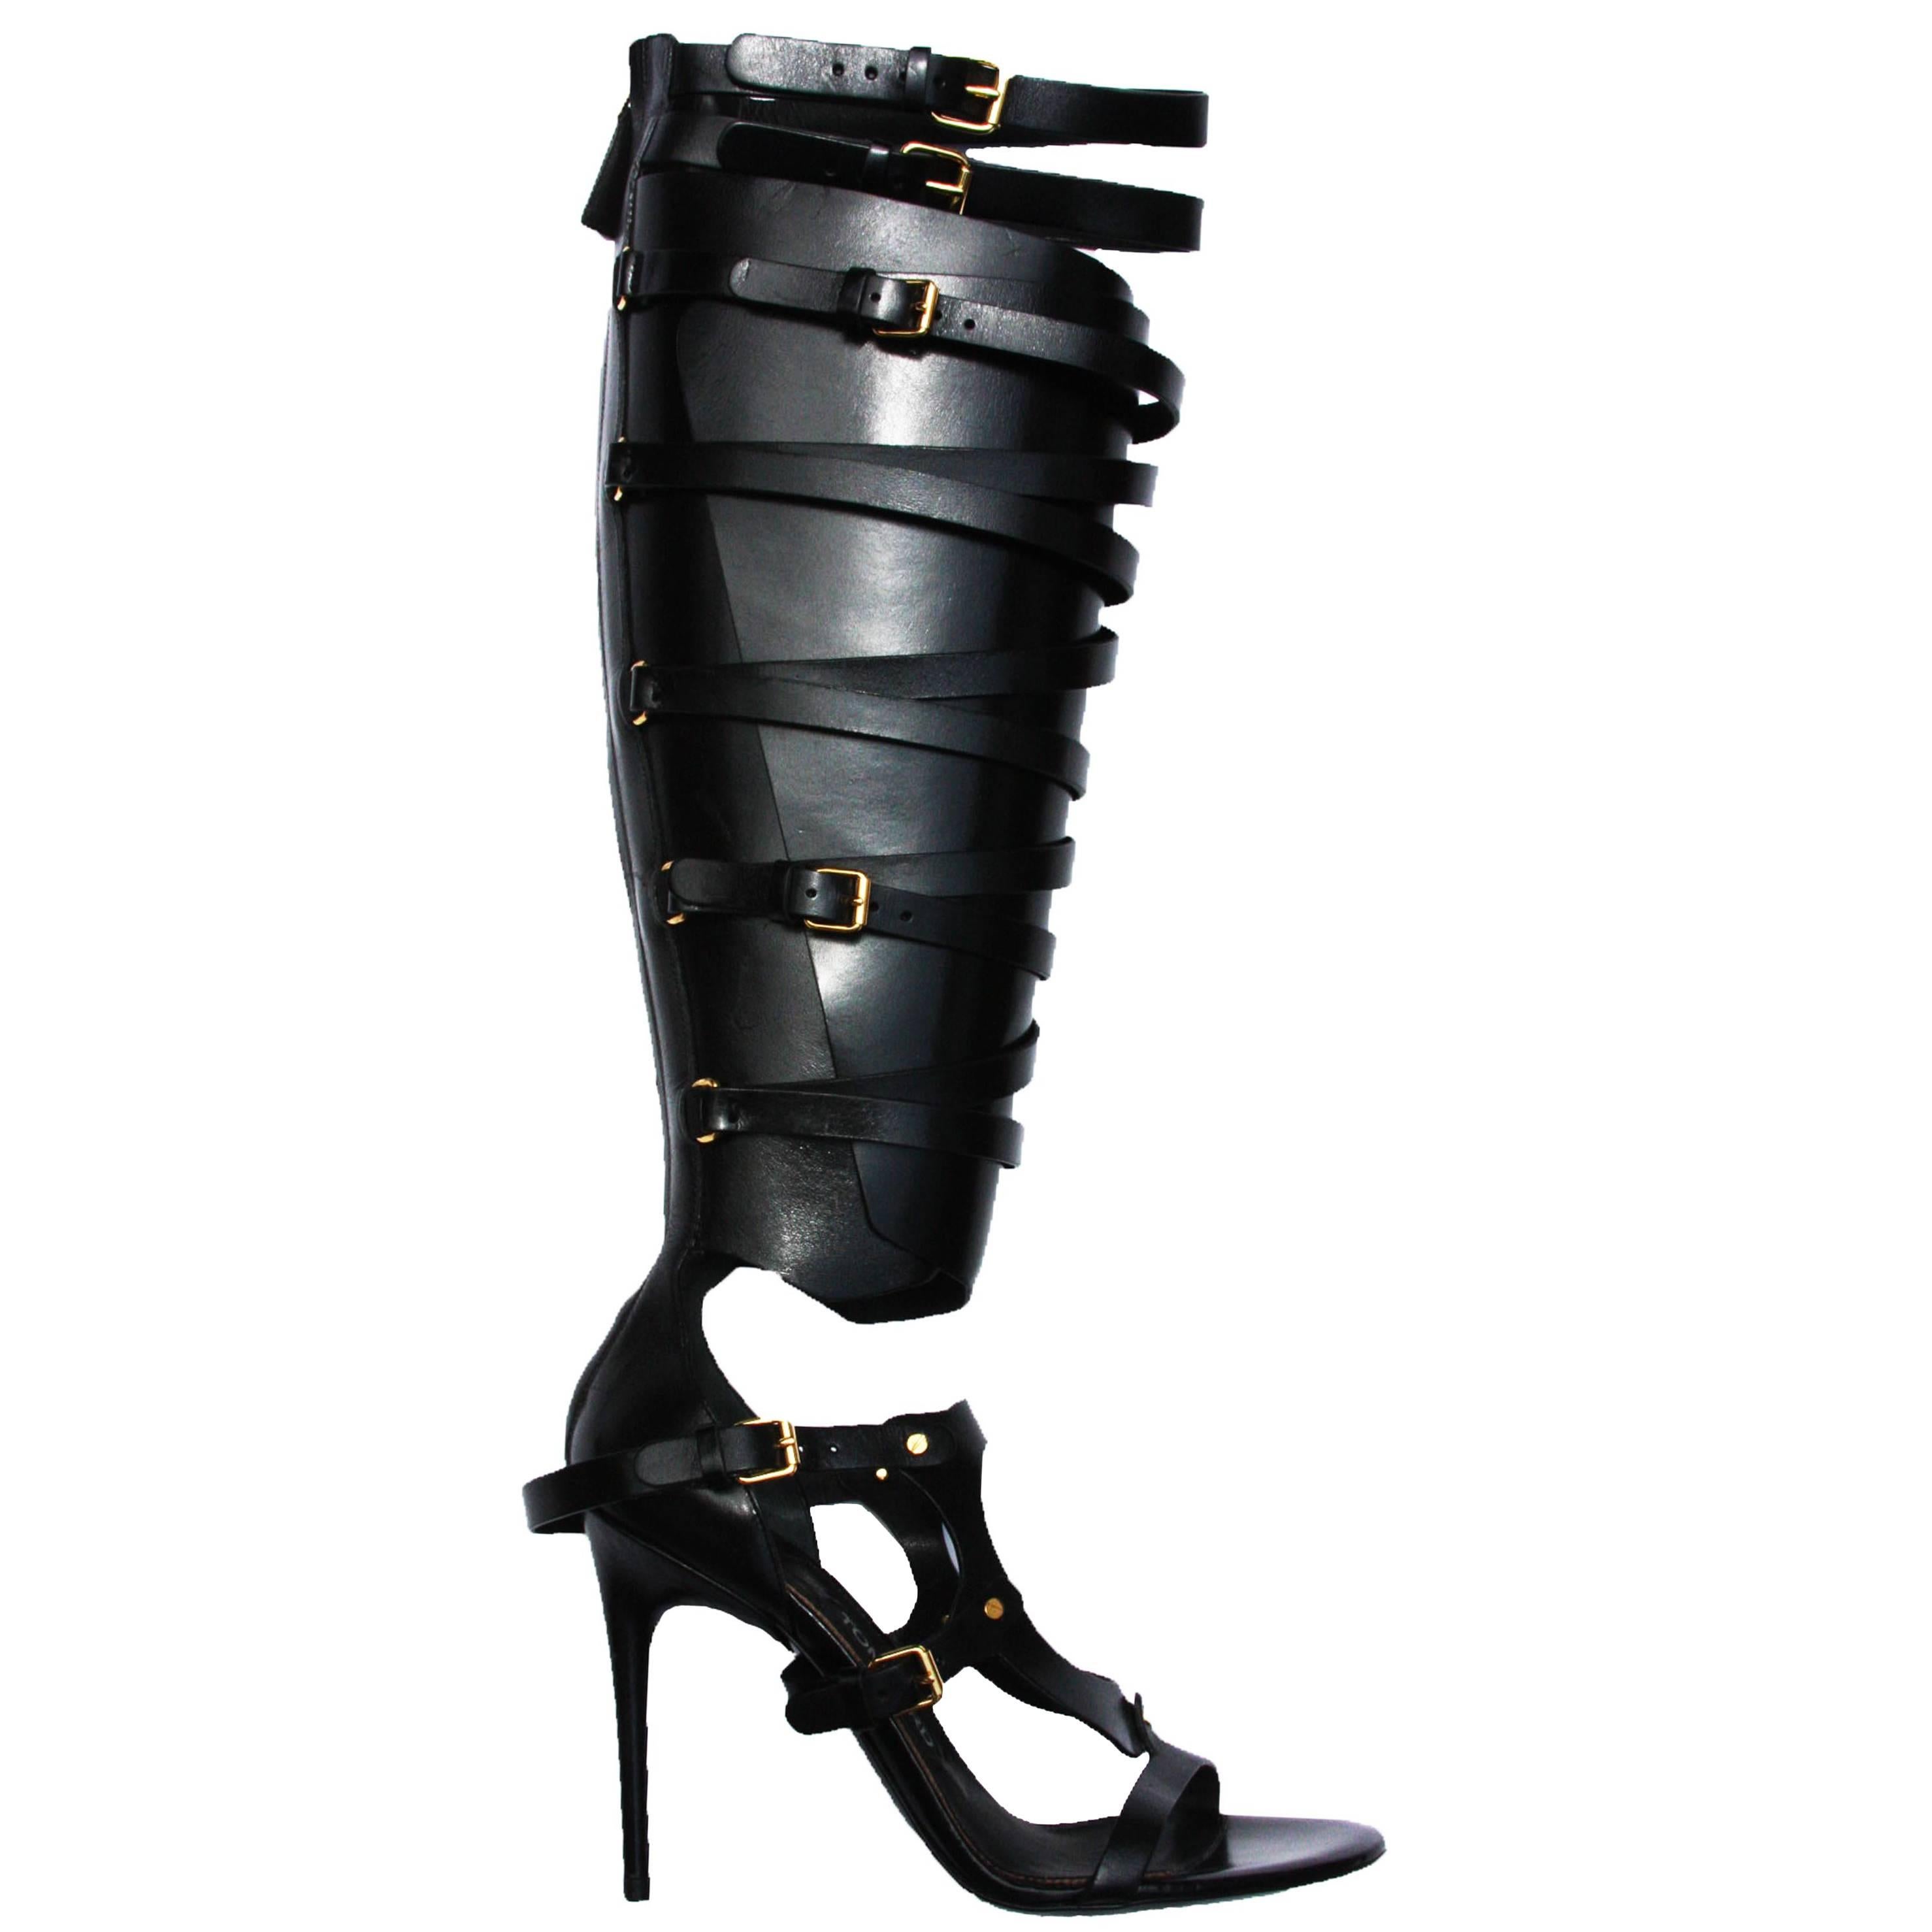 New TOM FORD Black Strappy Buckled Sandal Leather Gladiator Boots 